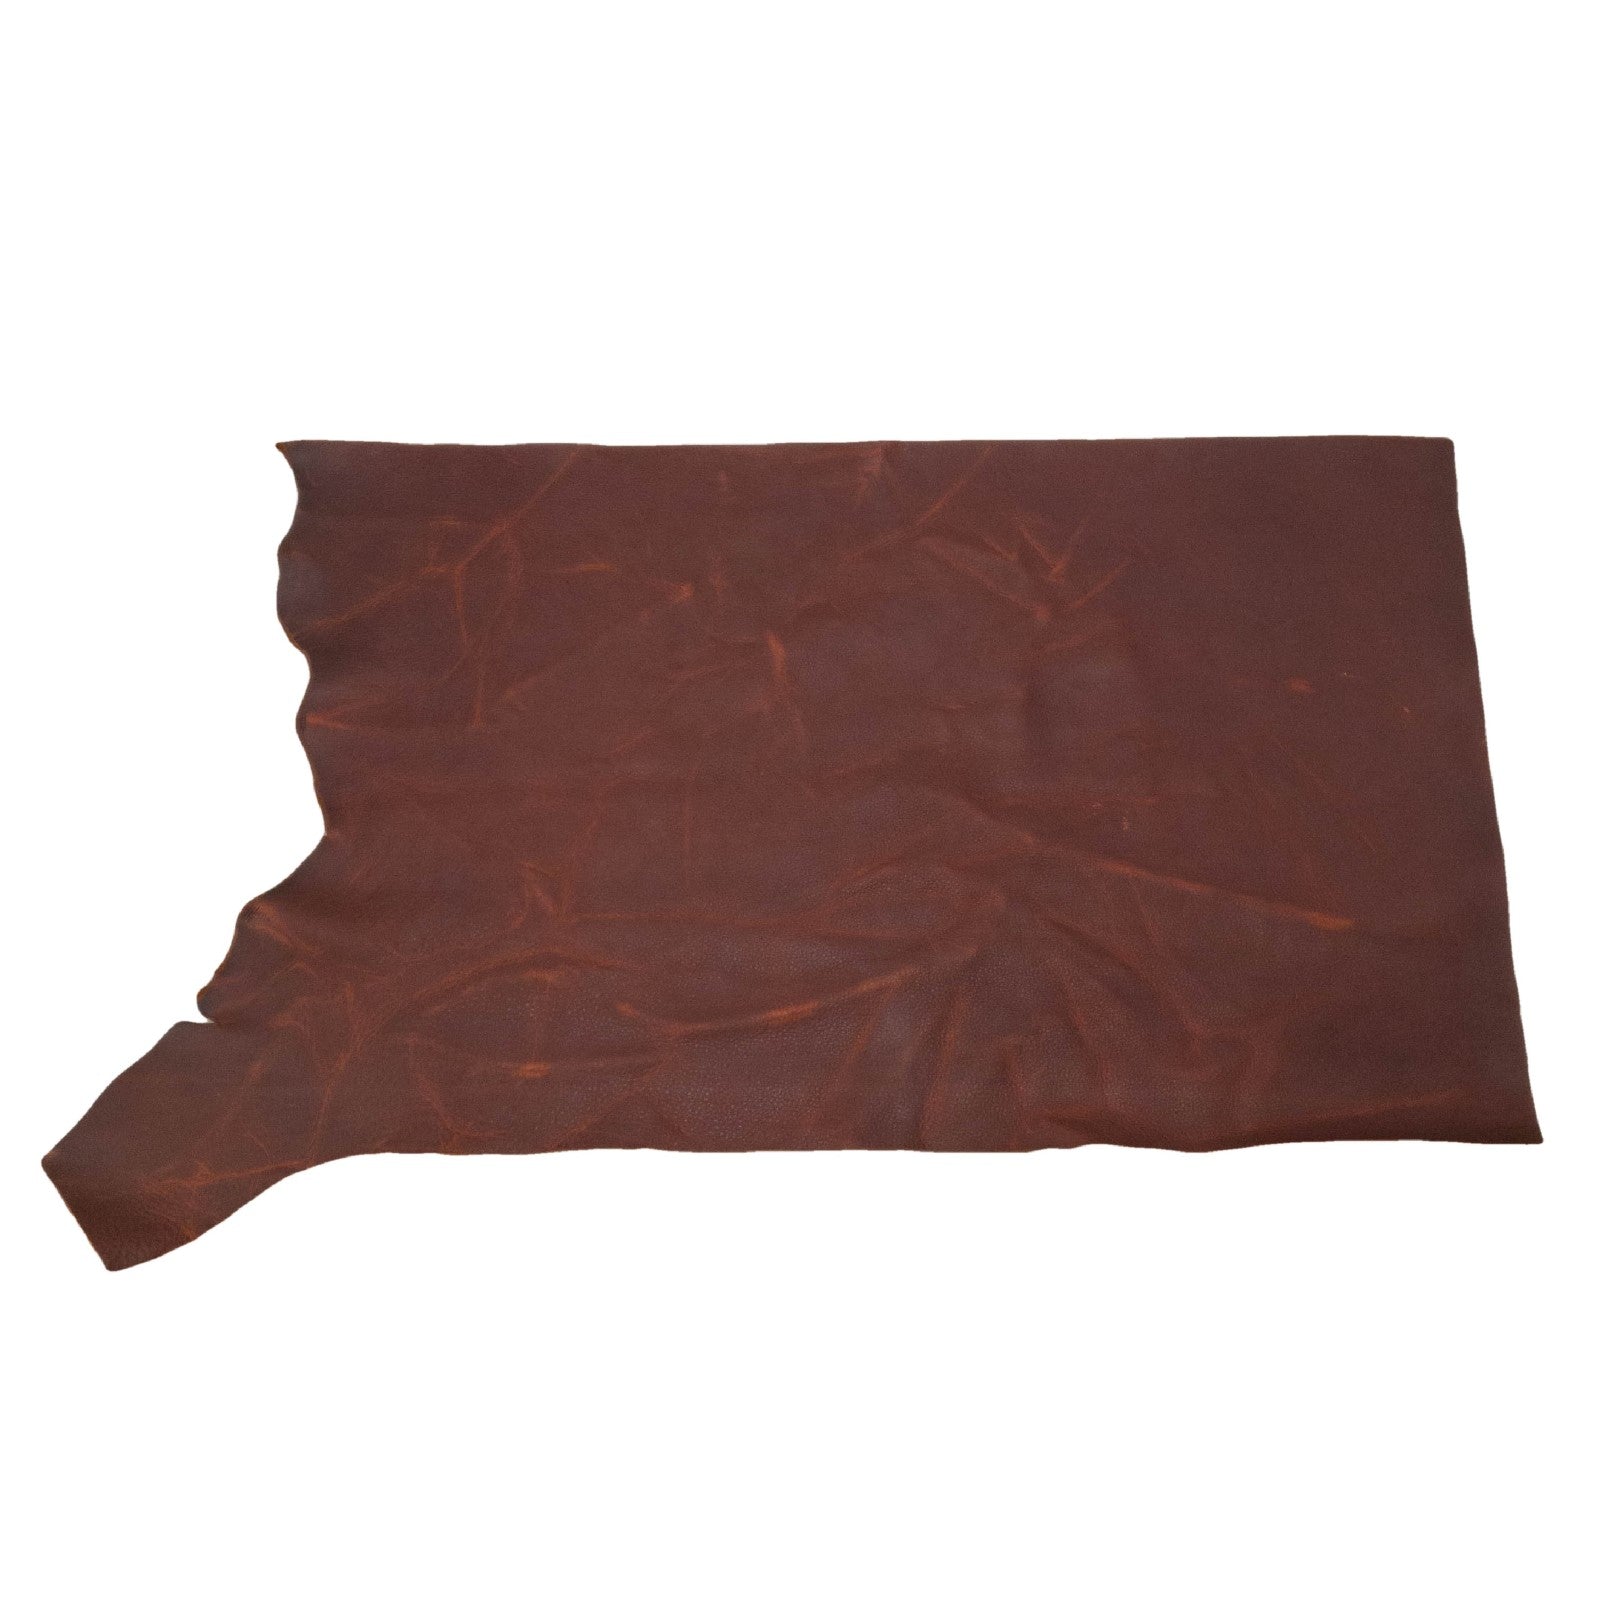 Mountain Man Maroon, Chap Cow Sides, Highland Ridge, 6.5-7.5 / Middle Piece | The Leather Guy